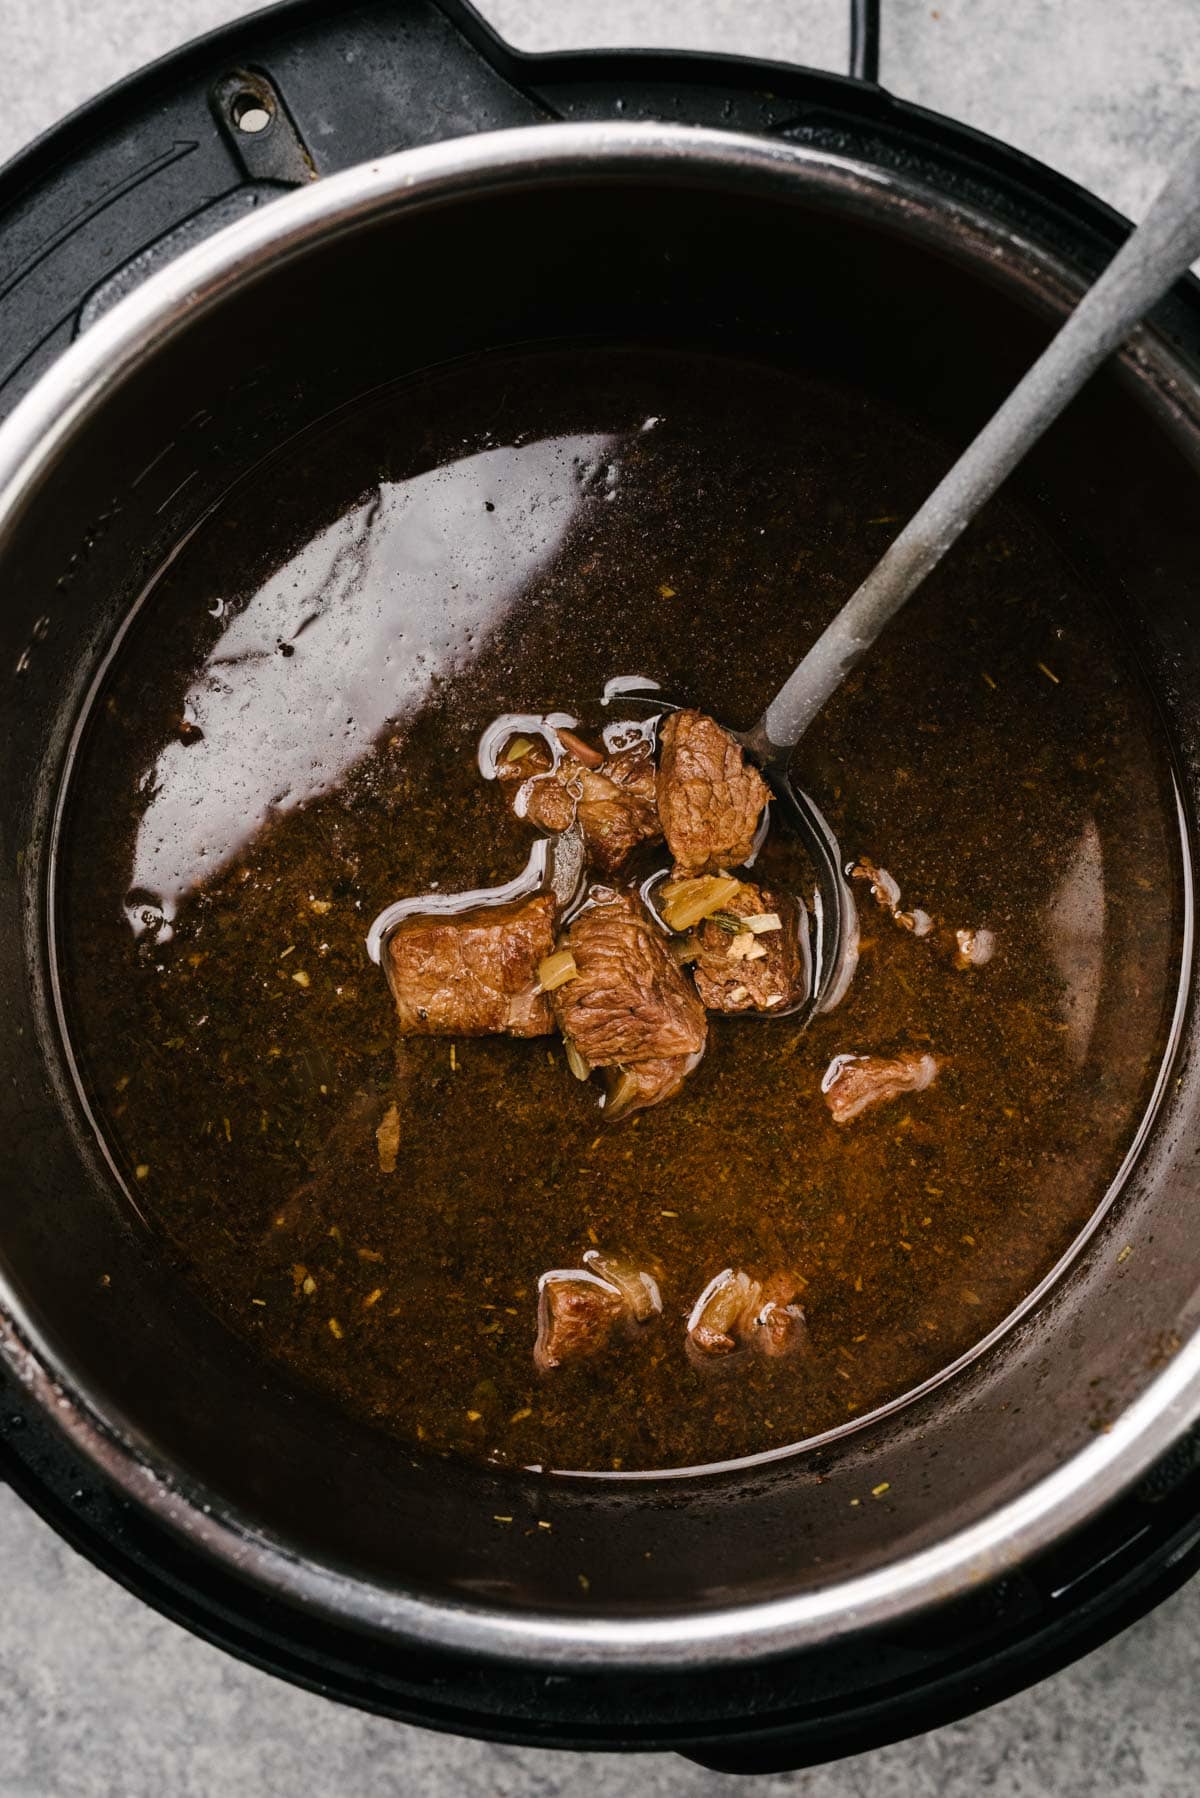 A ladle tucked into an Instant Pot showing tender beef tips in gravy, before thickening the gravy.